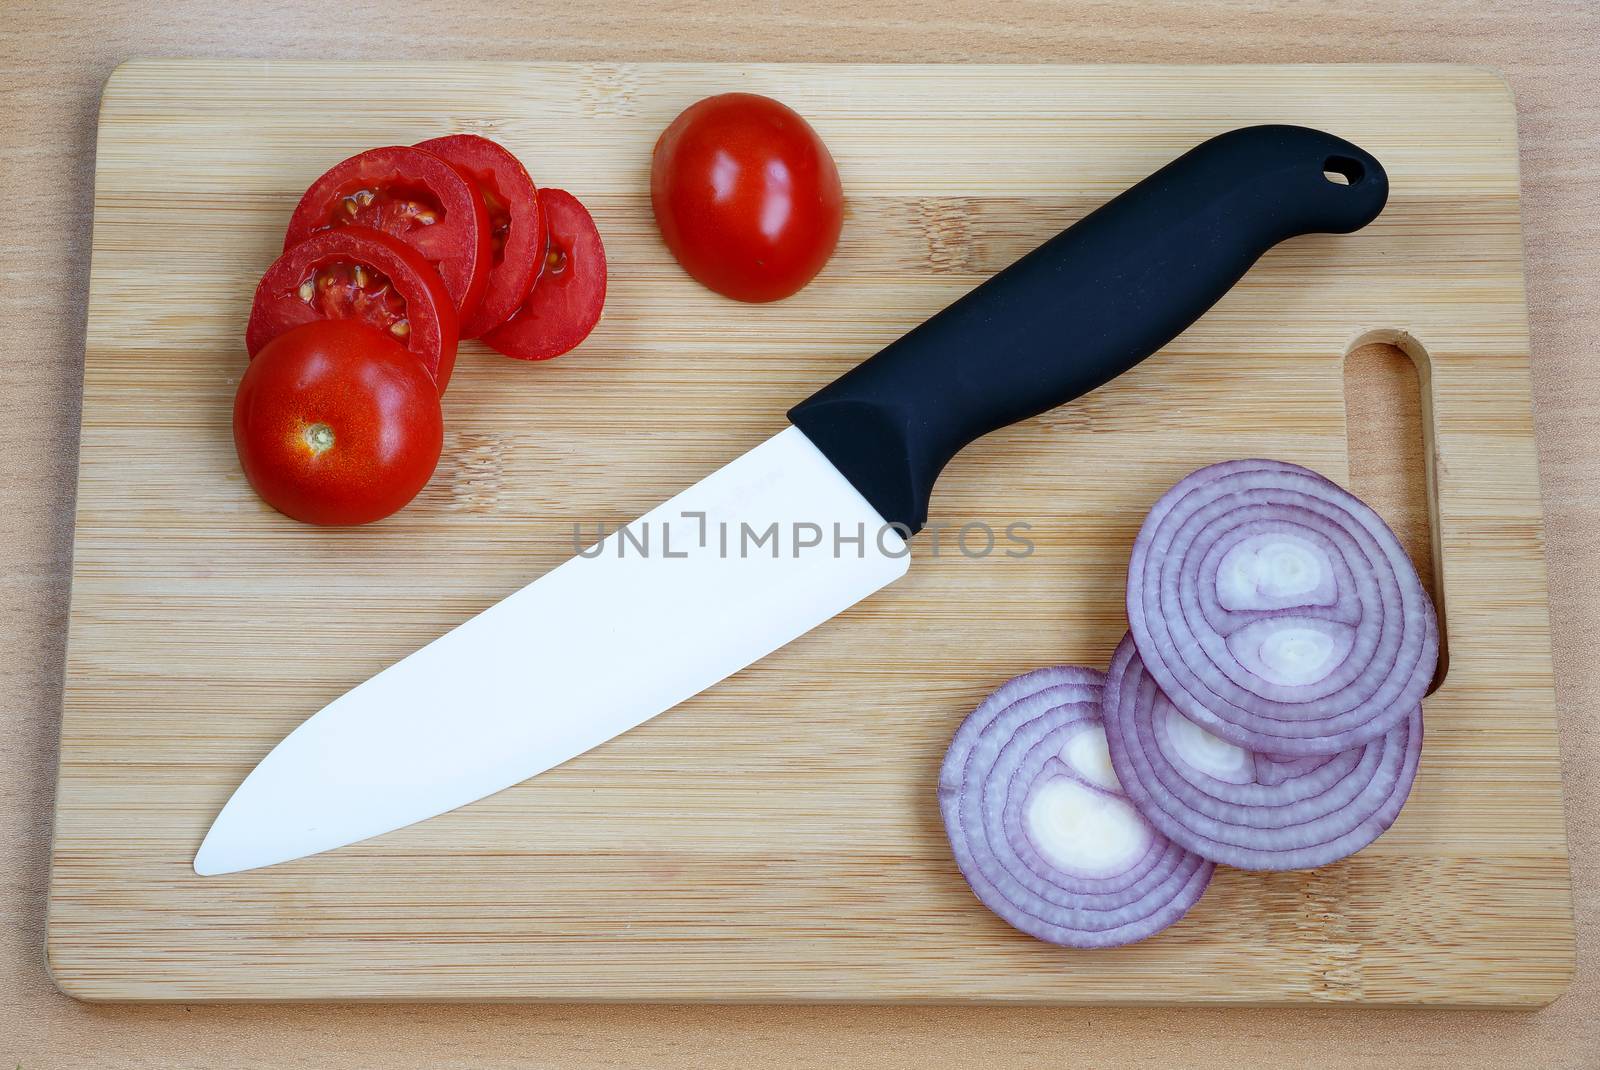 Ceramic knive with black handle on a wooden chopping board